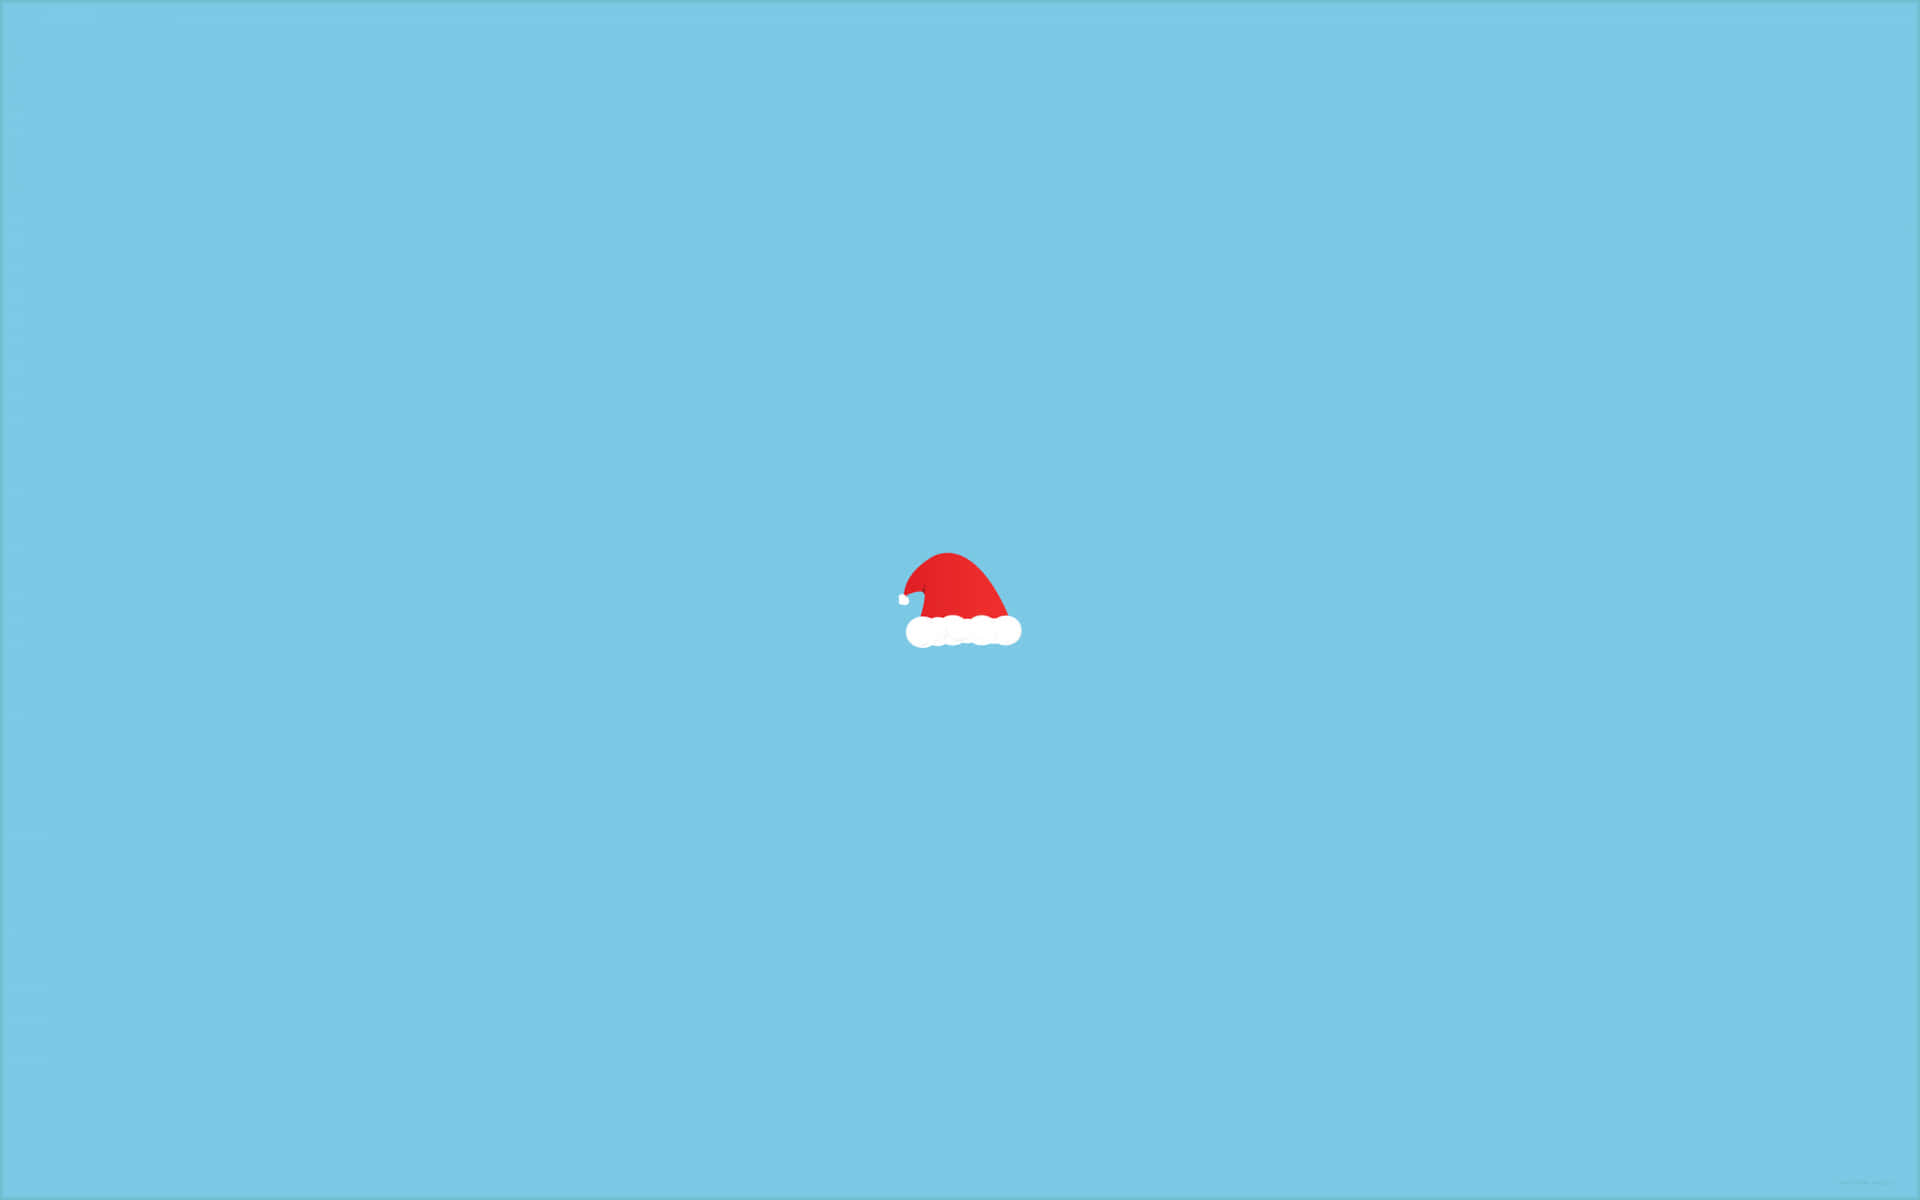 Celebrate the Holidays with a Minimalist Christmas Desktop Wallpaper